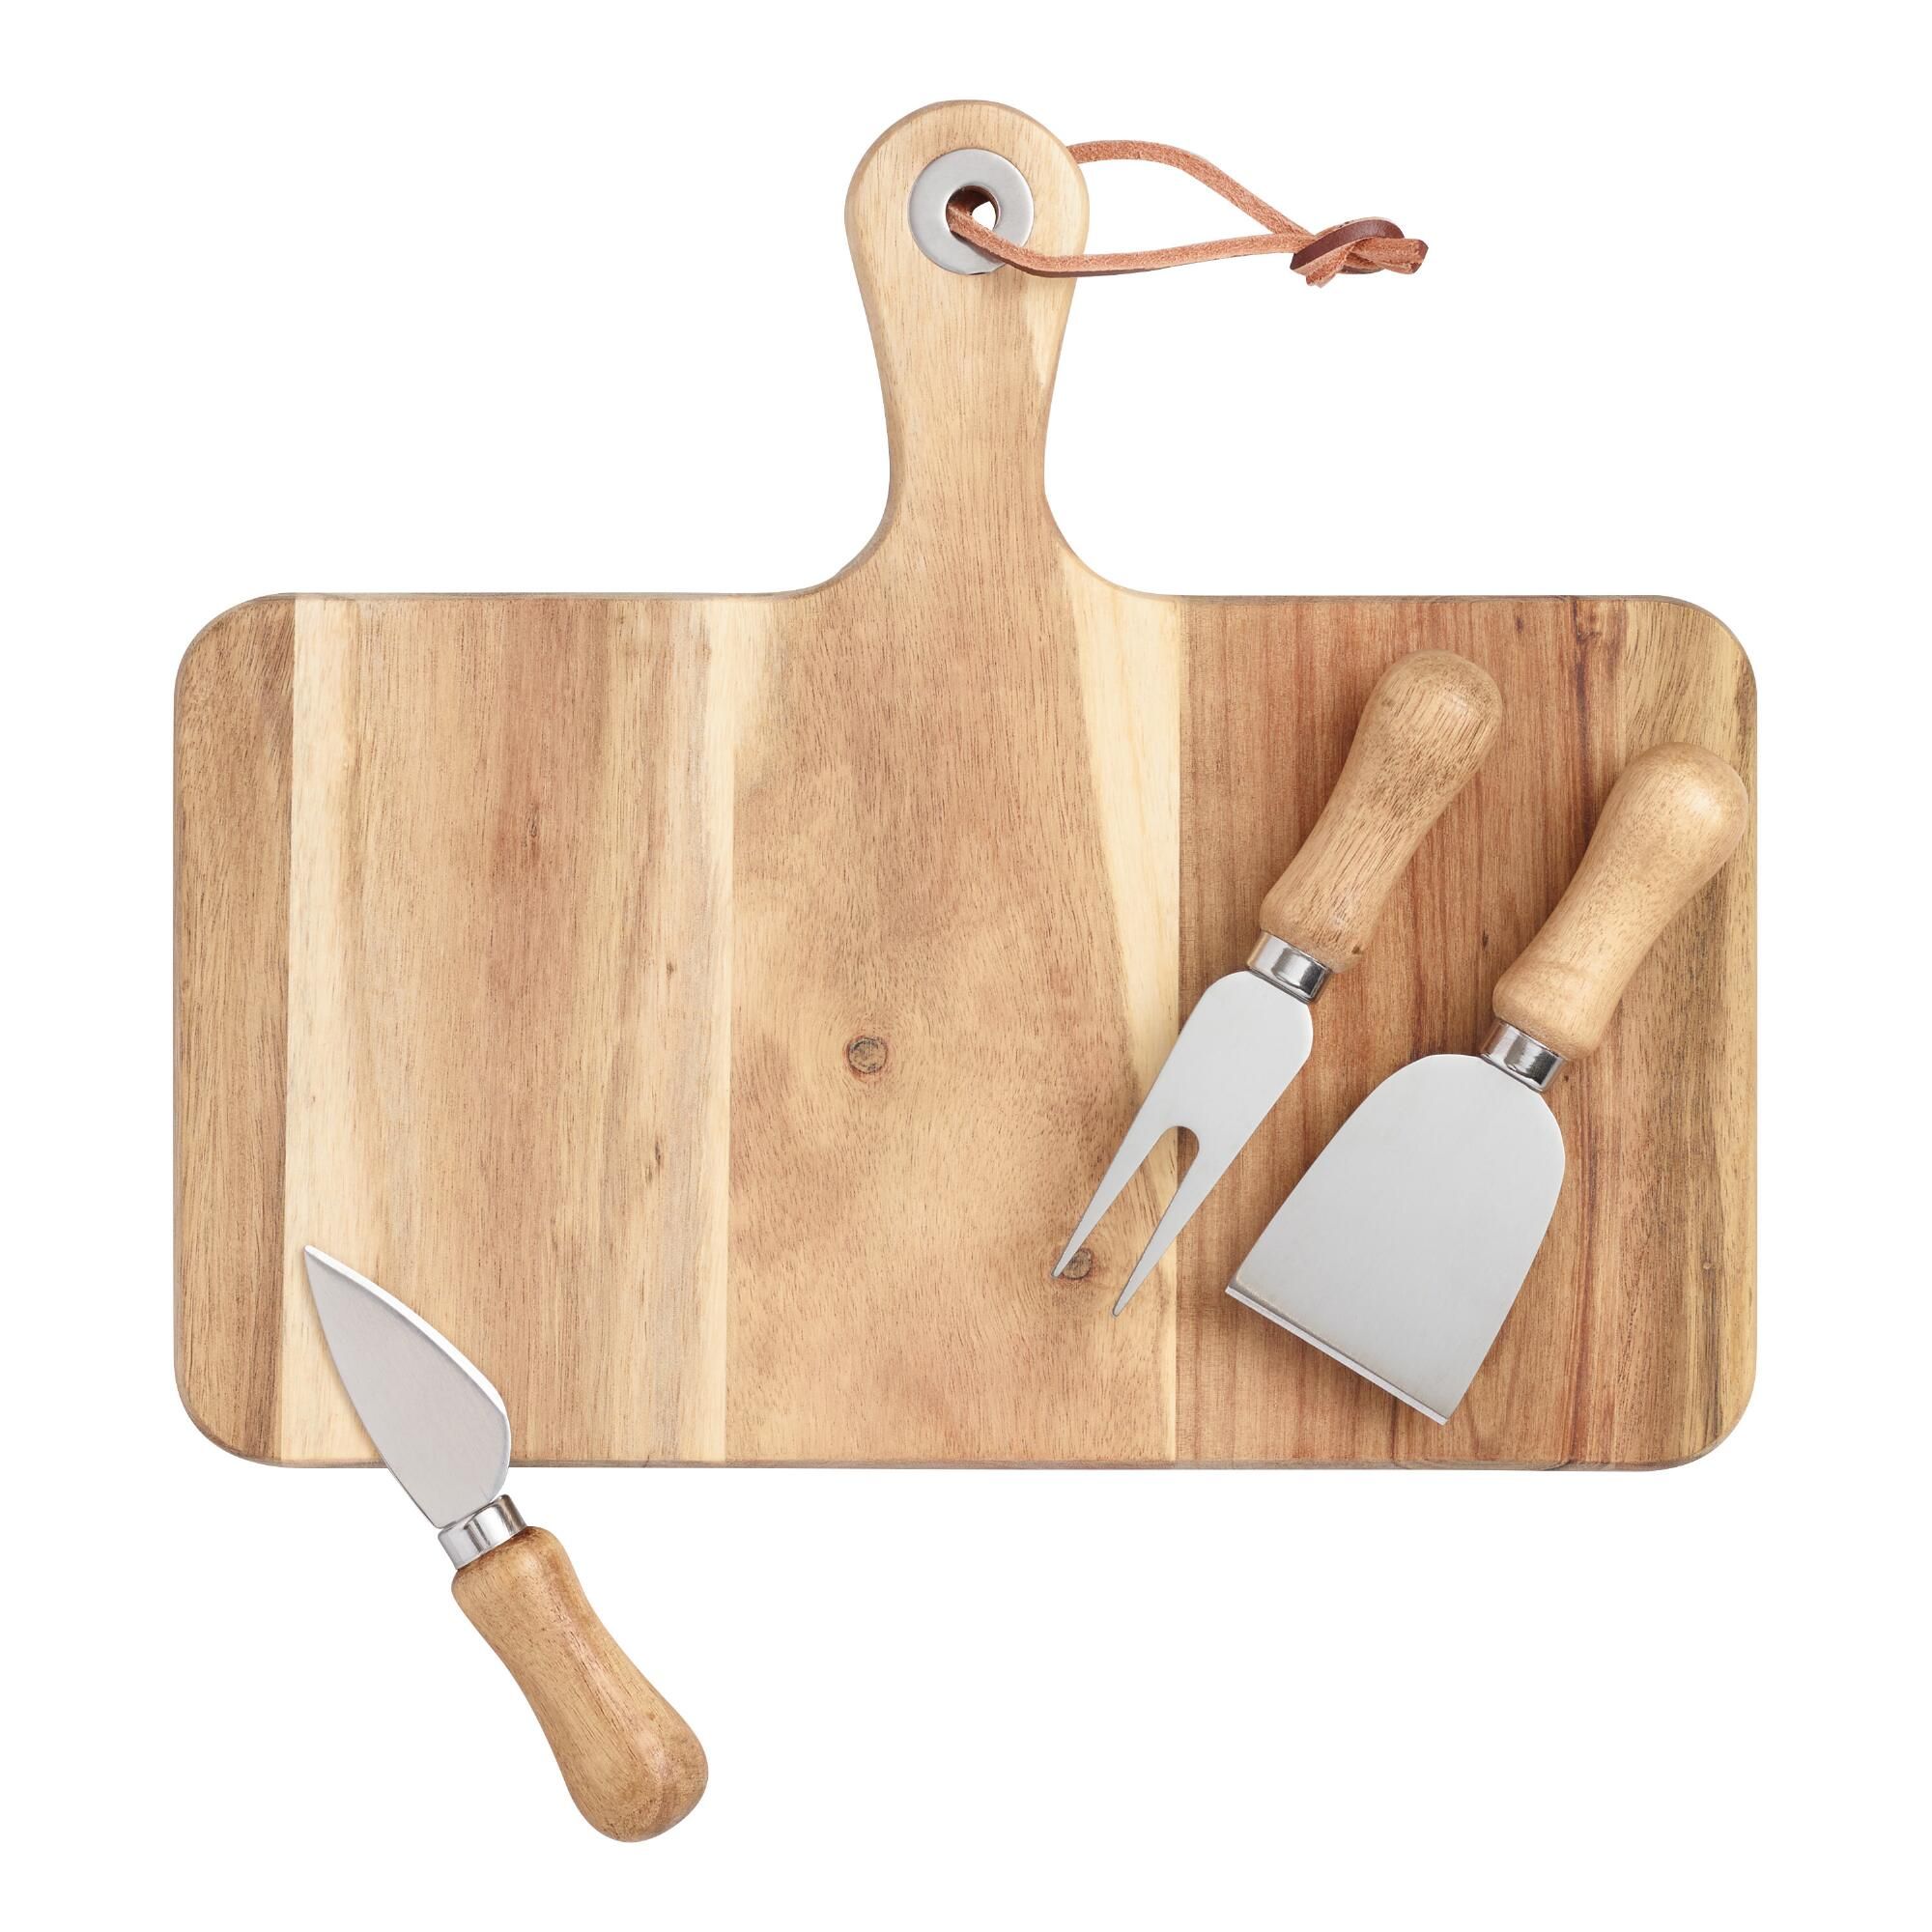 Cheese Knives and Cutting Board 4 Piece Set by World Market | World Market